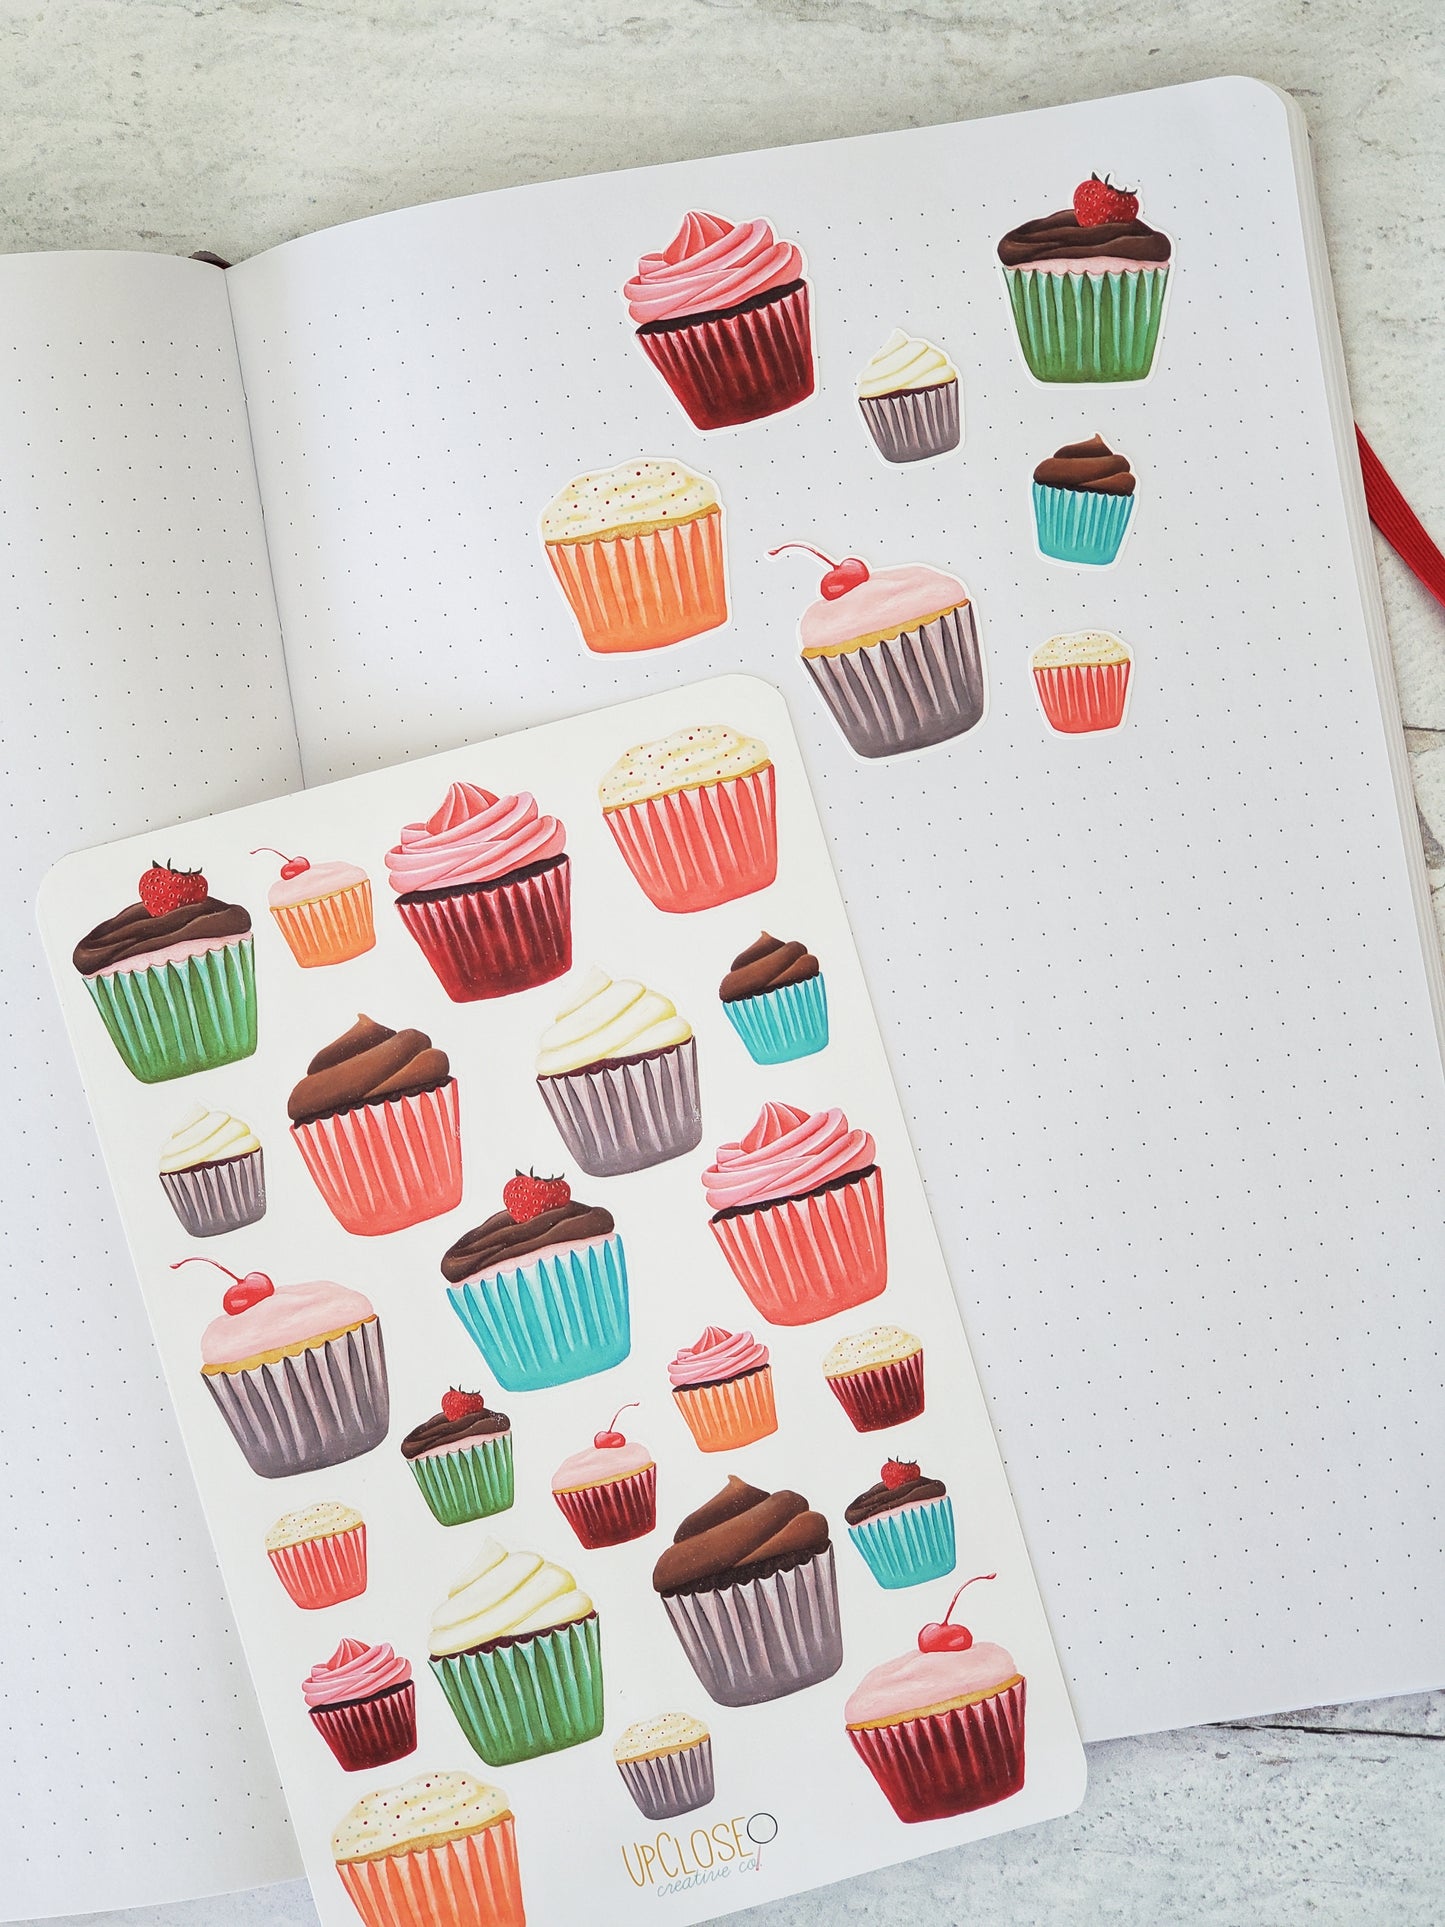 Several of the cupcake stickers have been arranged on a journal page. 